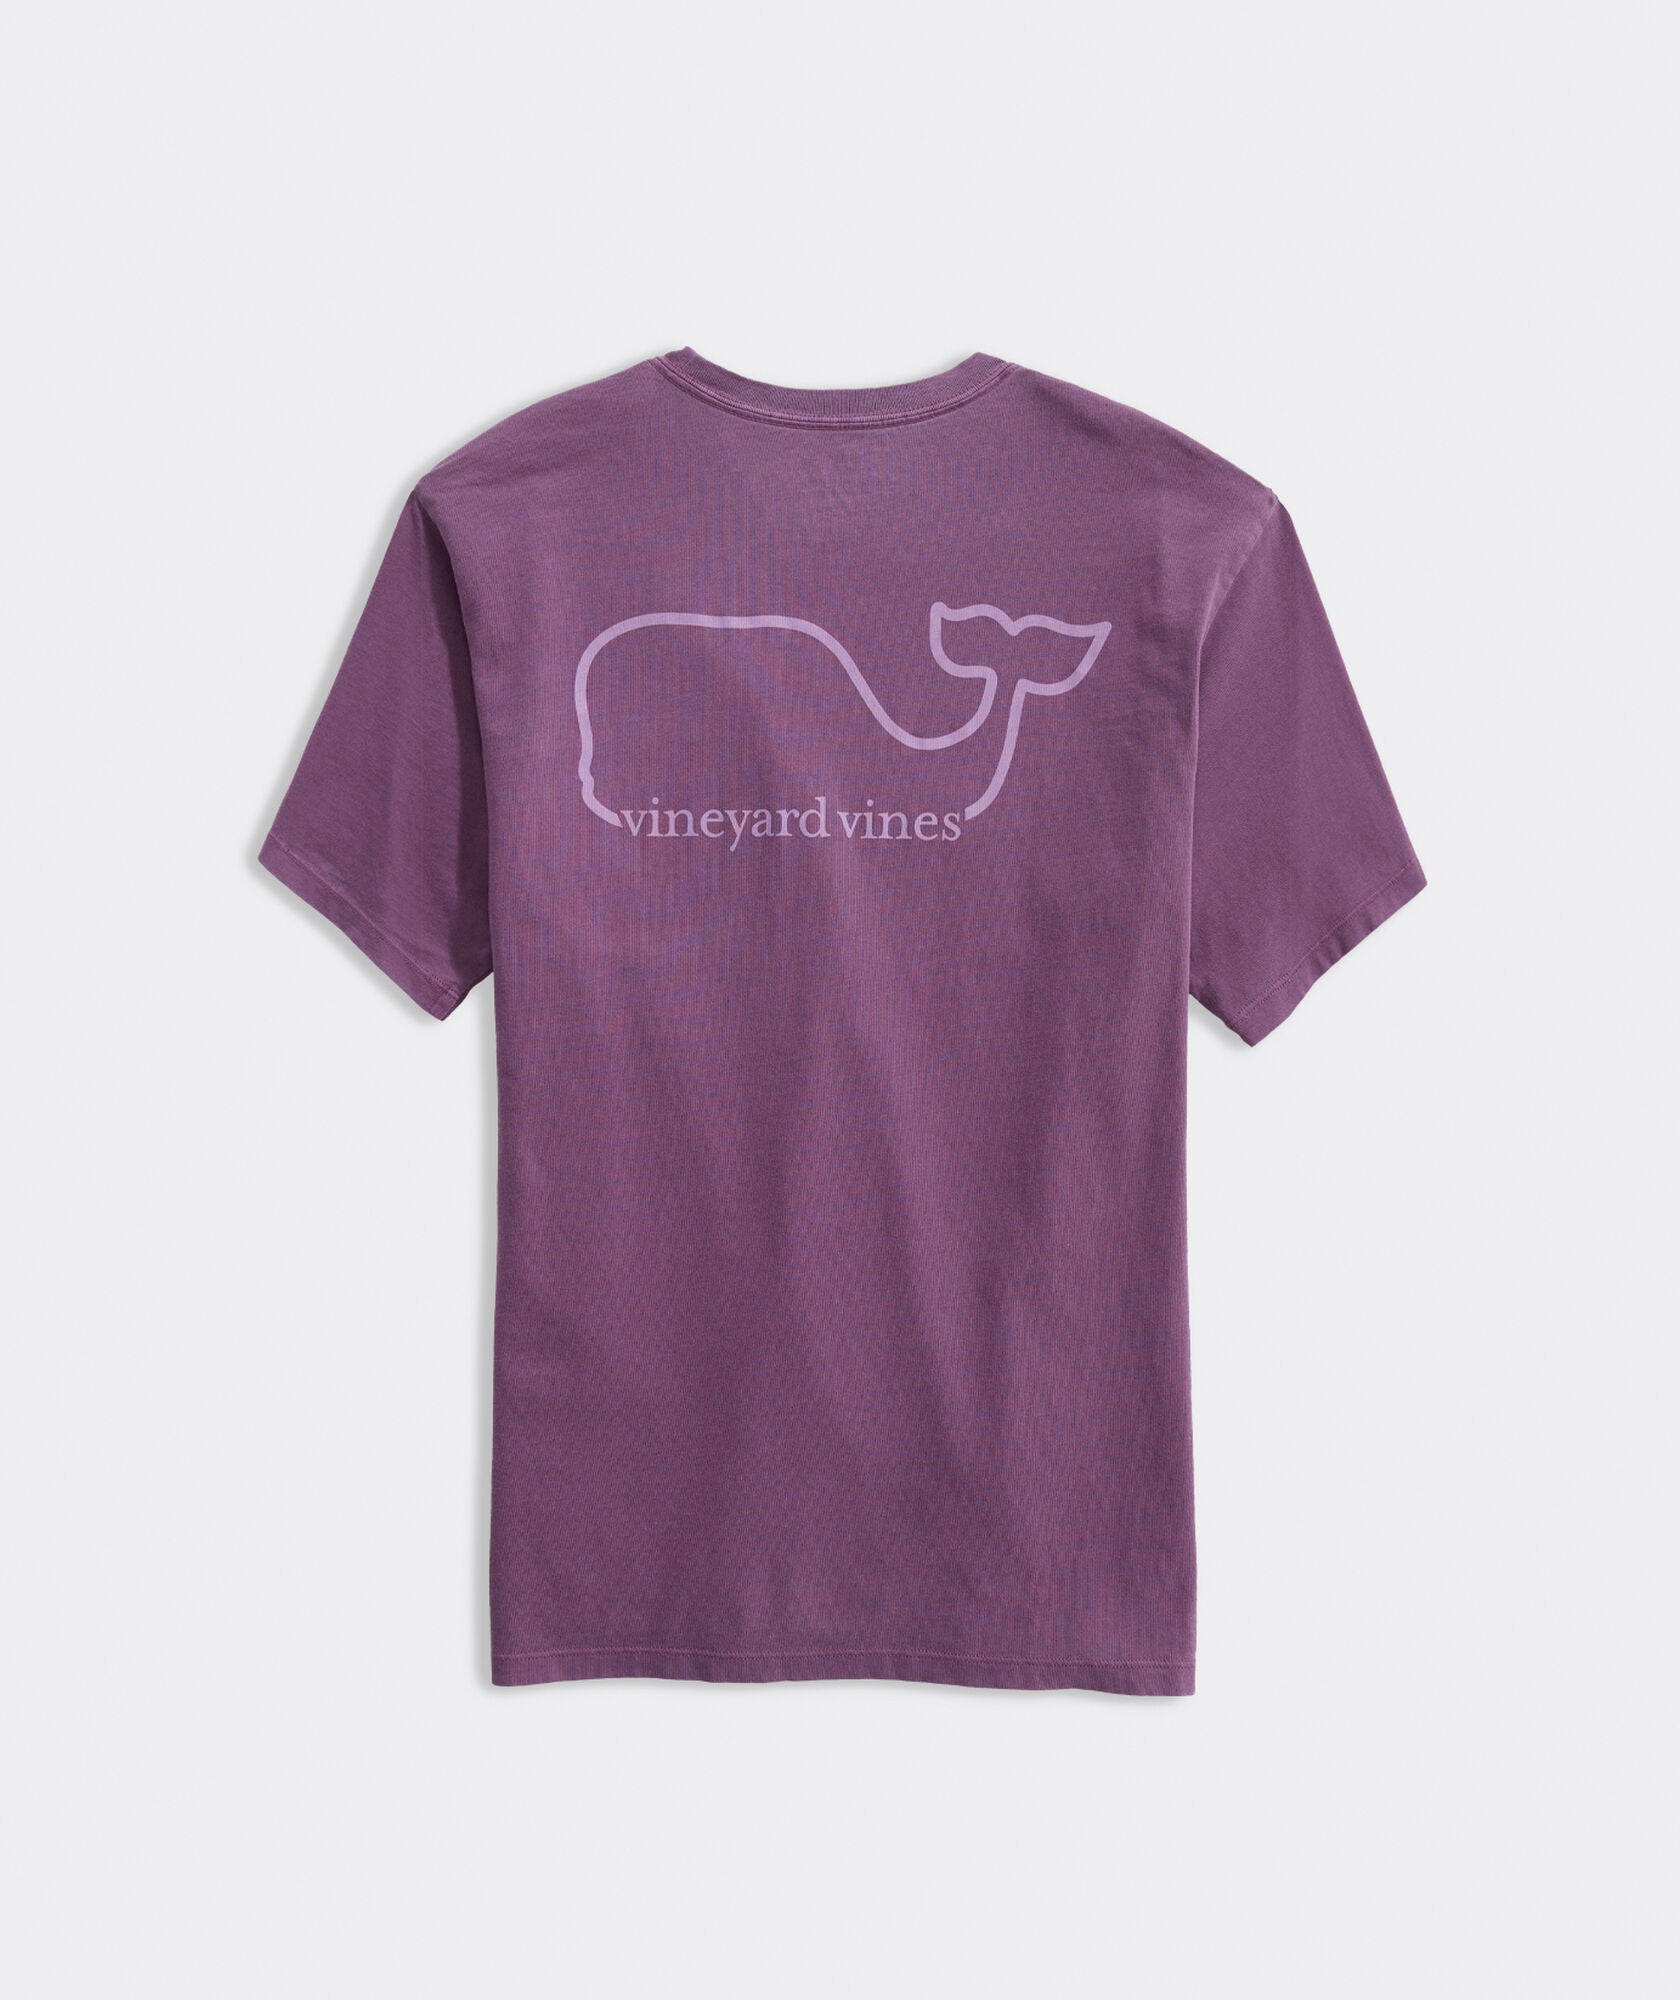 Vineyard Vines Men's,Garment-Dyed Whale Short-Sleeve Pocket Tee - Washed Purple X-Small / Washed Purple